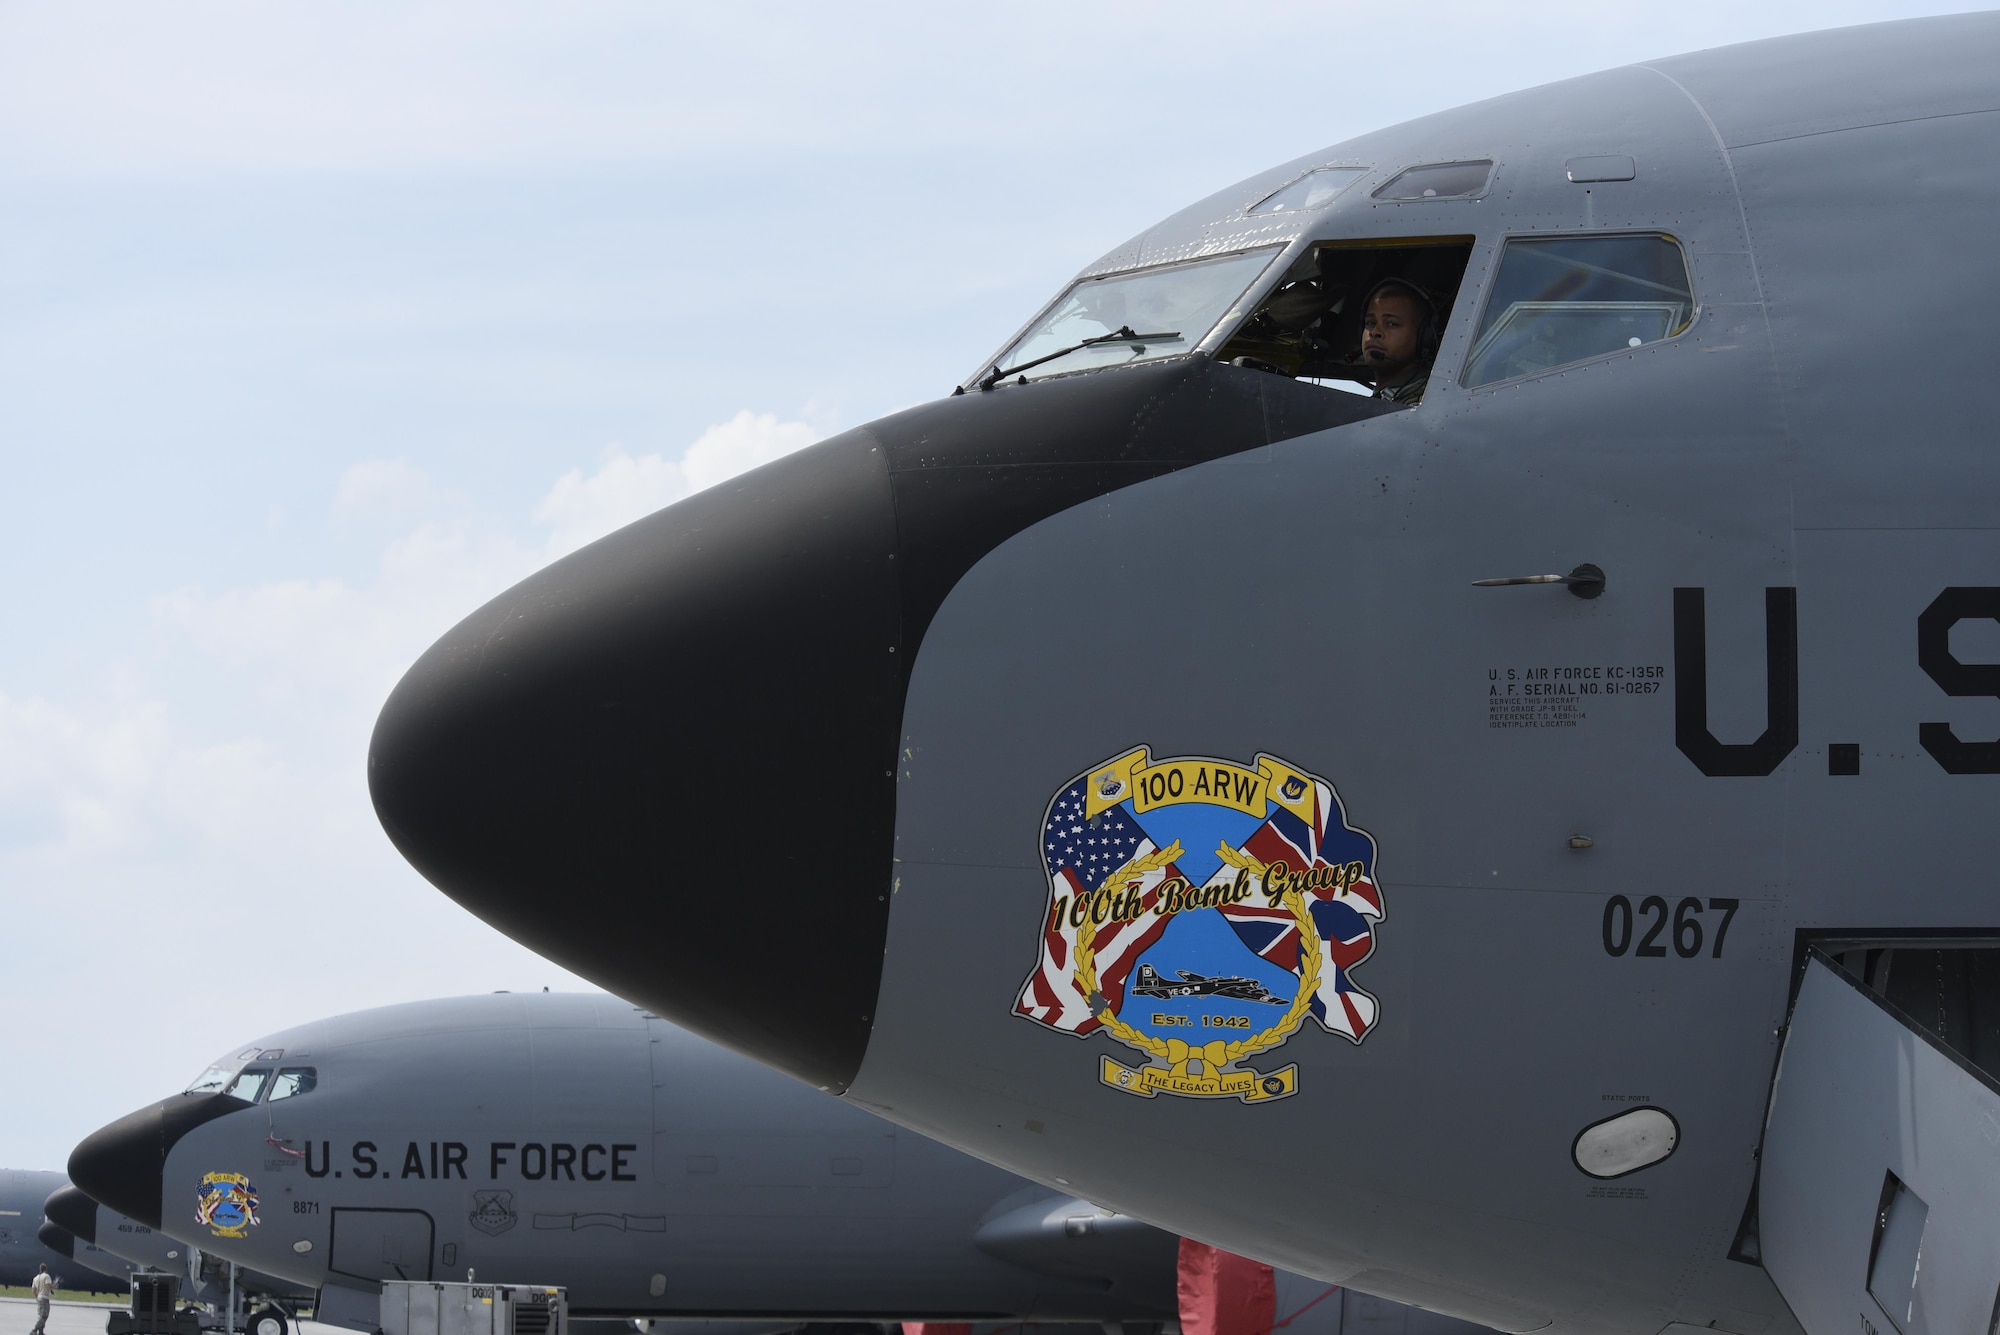 Capt. Nicholas McClendon, 351st Air Refueling Squadron pilot, conducts a pre-flight check on a KC-135R Stratotanker prior to takeoff during BALTOPS exercise at Powidz Air Base, Poland, June 5, 2017. BALTOPS is an annually recurring multinational exercise designed to enhance flexibility and interoperability, as well as demonstrate resolve of allied and partner forces to defend the Baltic region. Participating nations include Belgium, Denmark, Estonia, Finland, France, Germany, Latvia, Lithuania, the Netherlands, Norway, Poland, Sweden, the United Kingdom, and the United States. (U.S. Air Force photo by Staff Sgt. Jonathan Snyder)